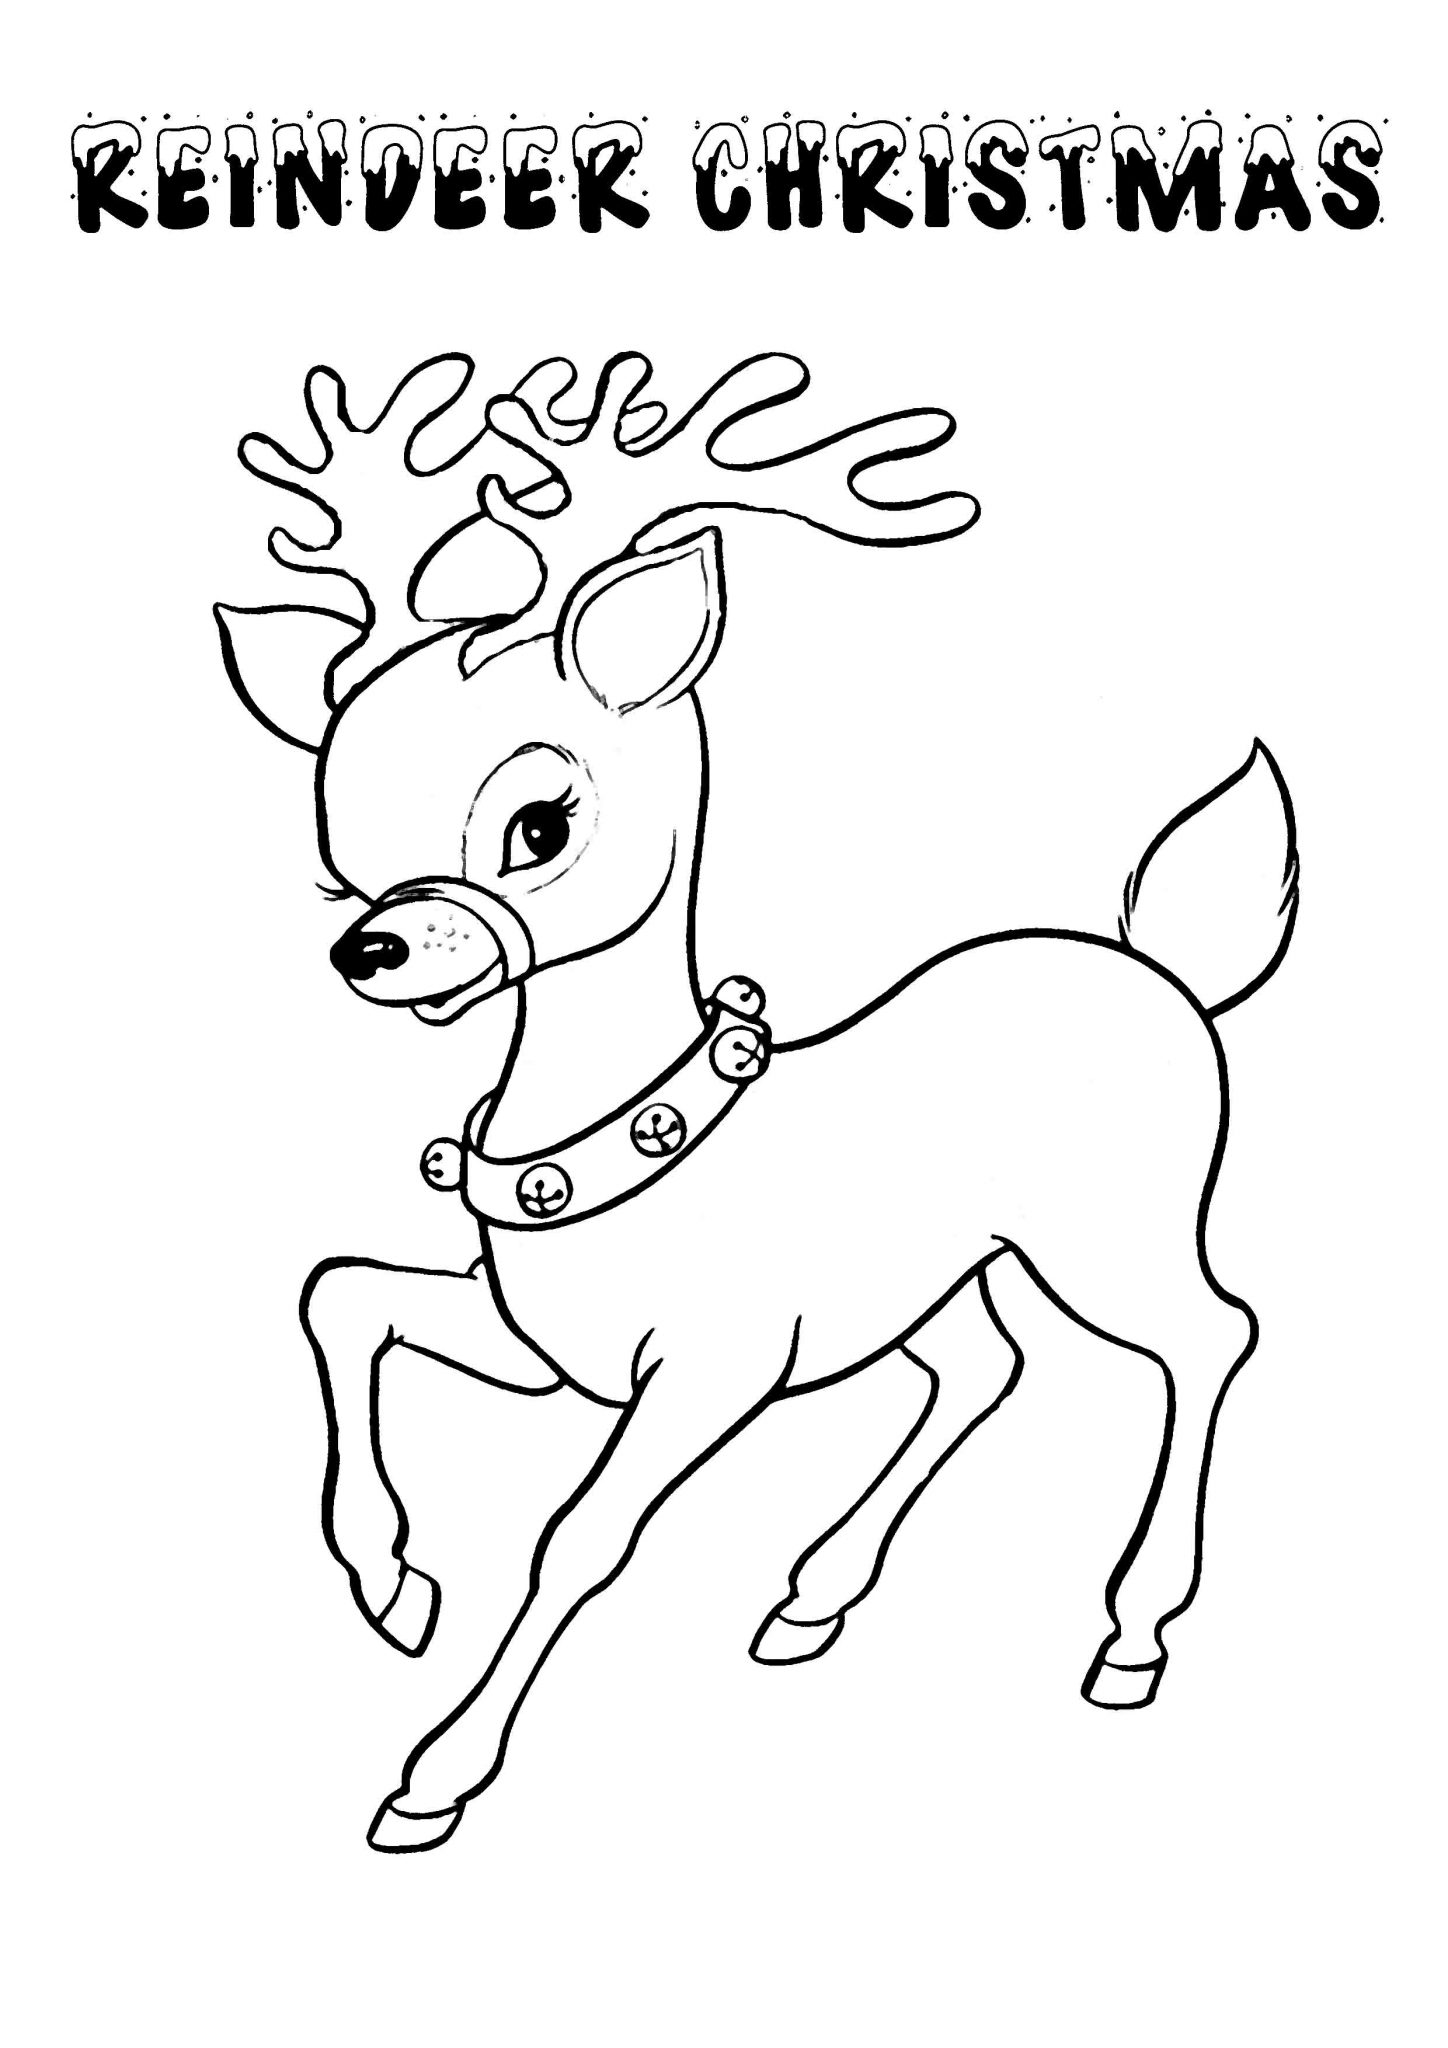 Print & Download Printable Christmas Coloring Pages for Kids